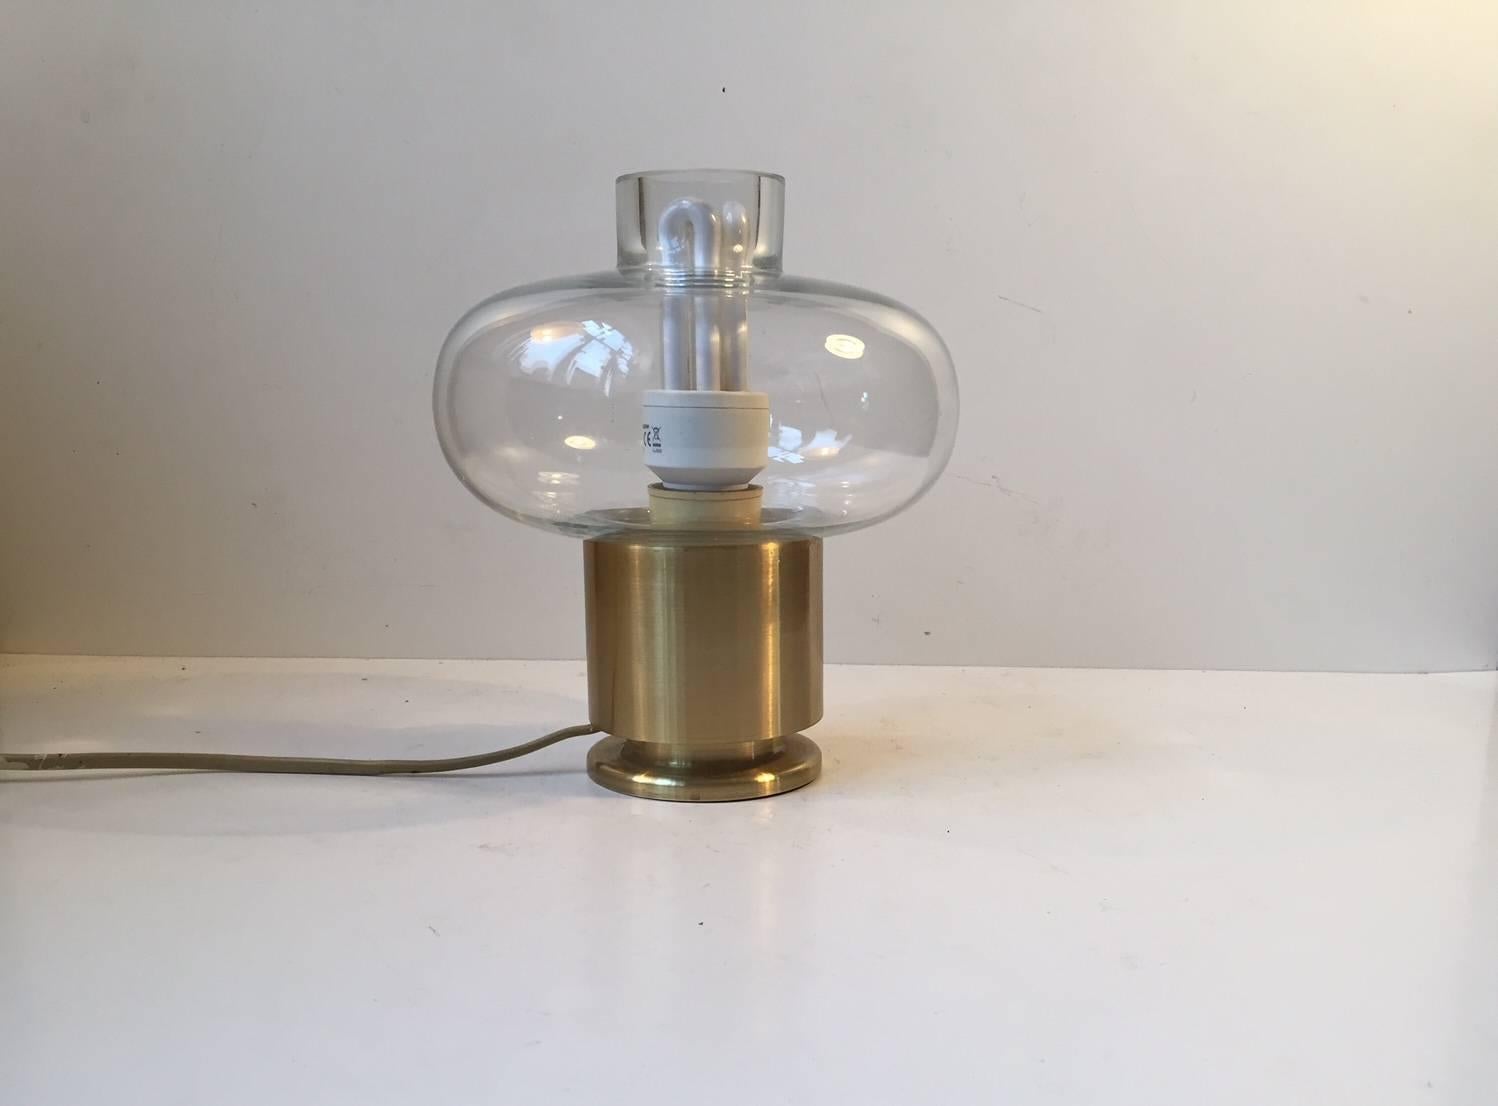 Small table light composed of brass and thick clear glass. It was manufactured by Fog & Mørup in Denmark in the early 1970s. The base is labeled with makers mark from F&M. The style of this light is strikingly reminiscent of Hans Agne Jakobsson.